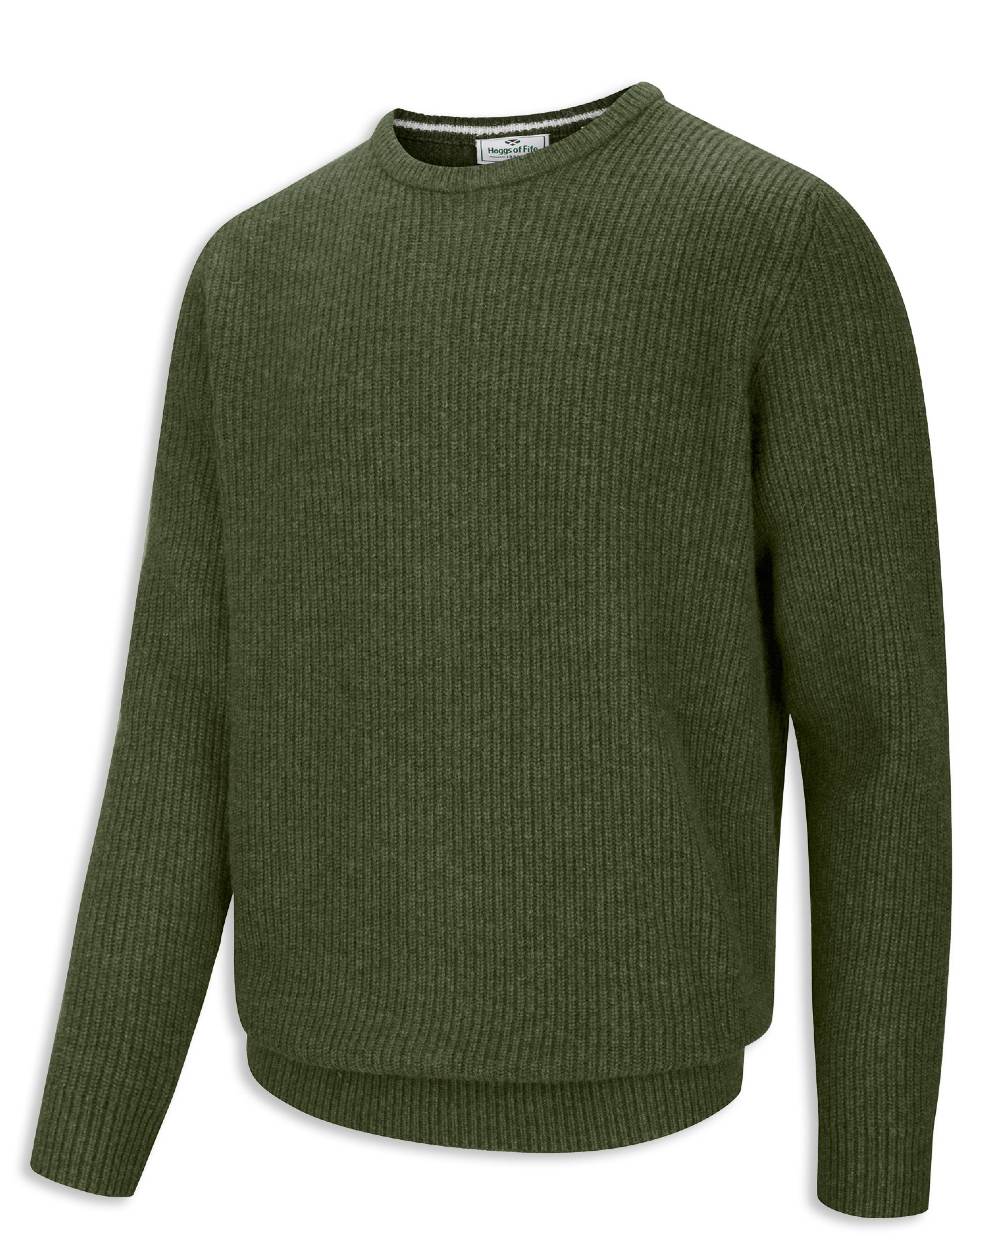 Hoggs of Fife Borders Ribbed Knit Pullover in Thyme 